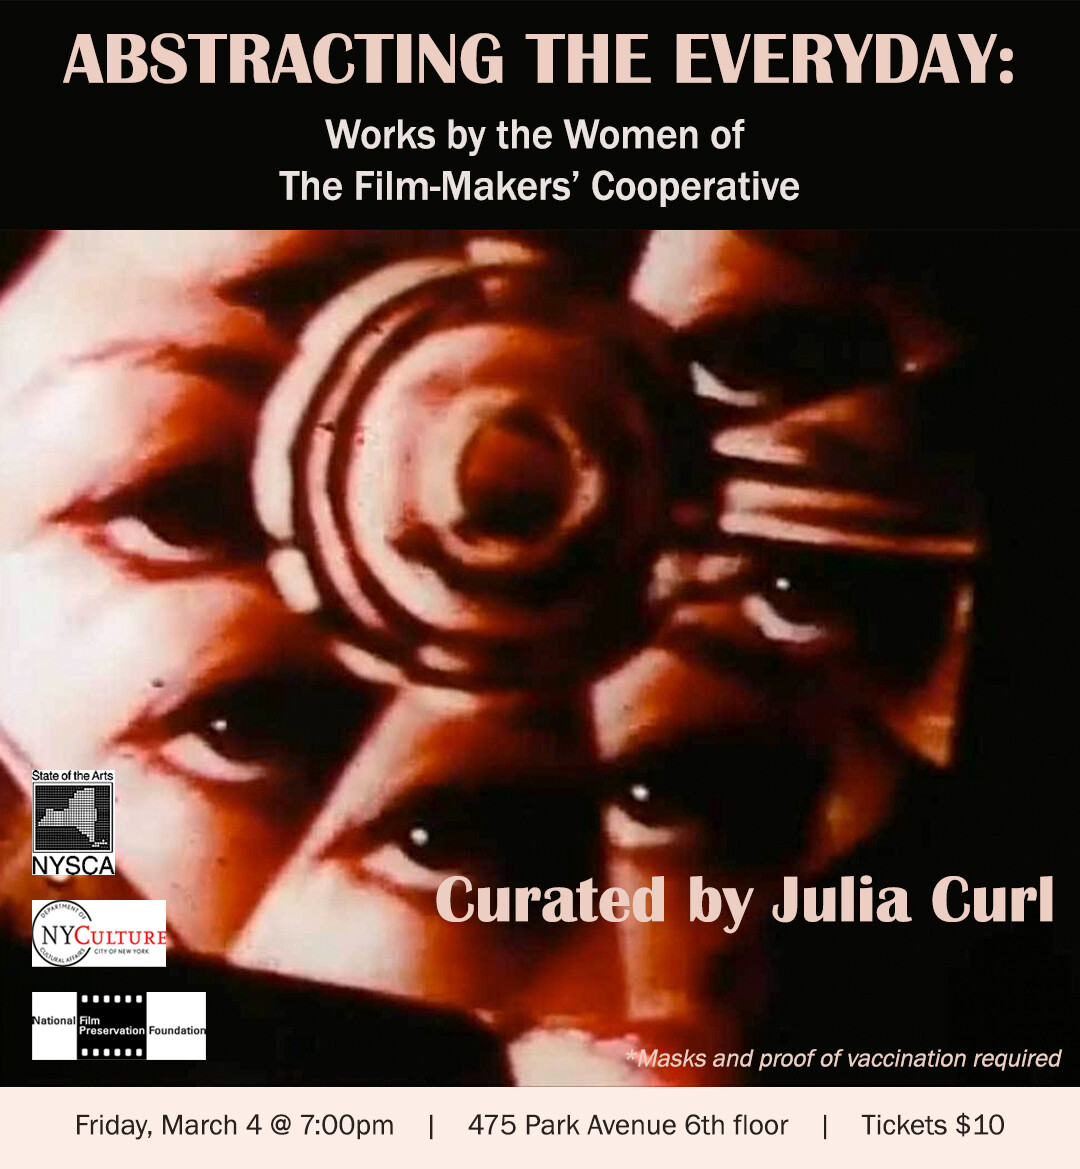 ABSTRACTING THE EVERYDAY: Works by the Women of The Film-Makers' Cooperative